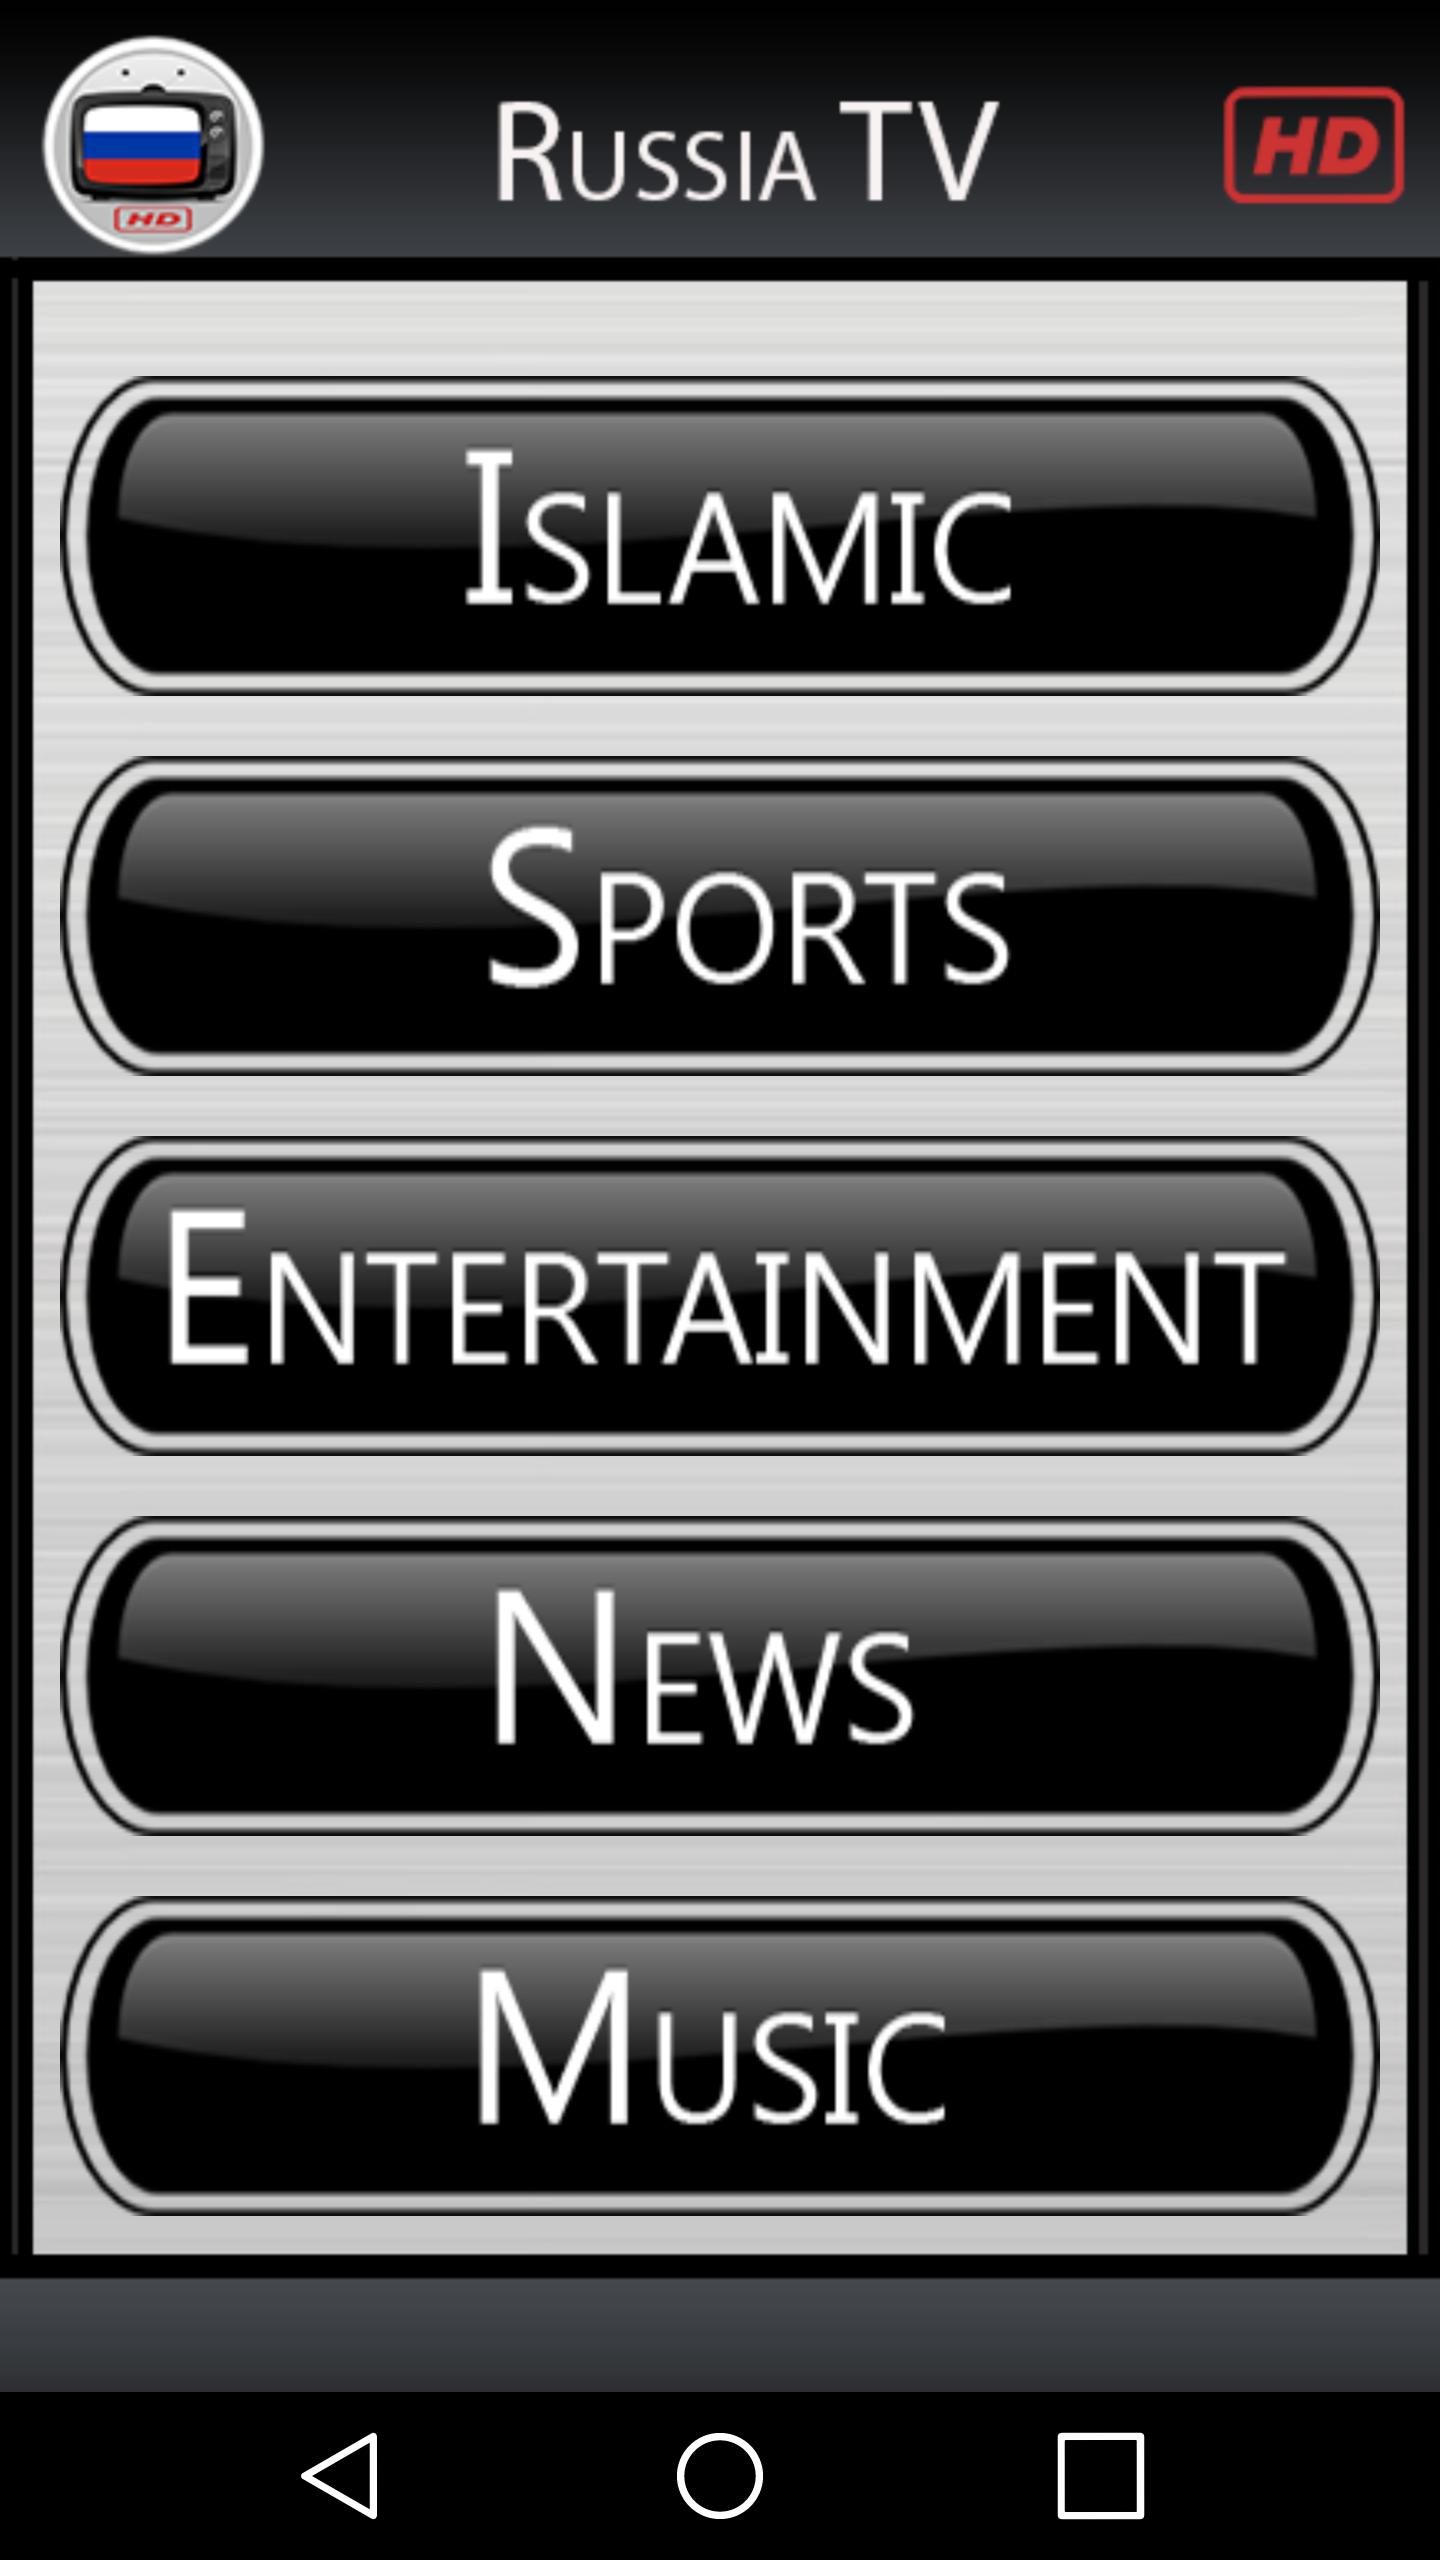 Russia TV for Android - APK Download